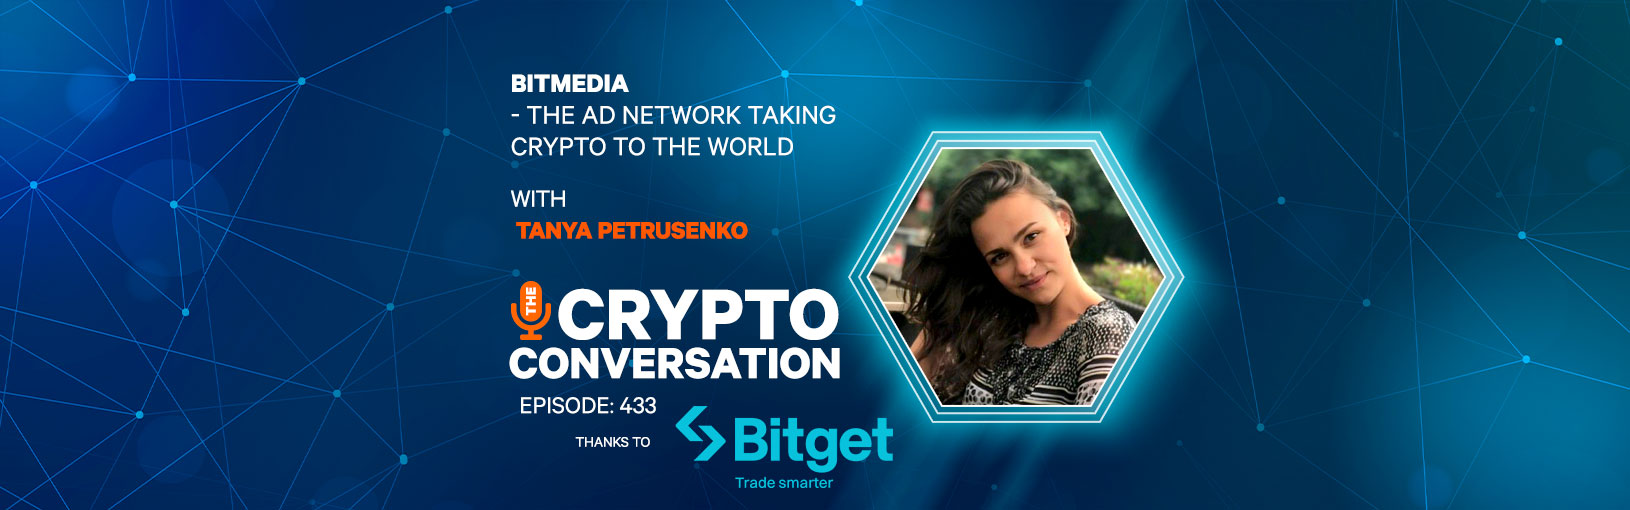 Bitmedia – The Ad Network taking Crypto to the World